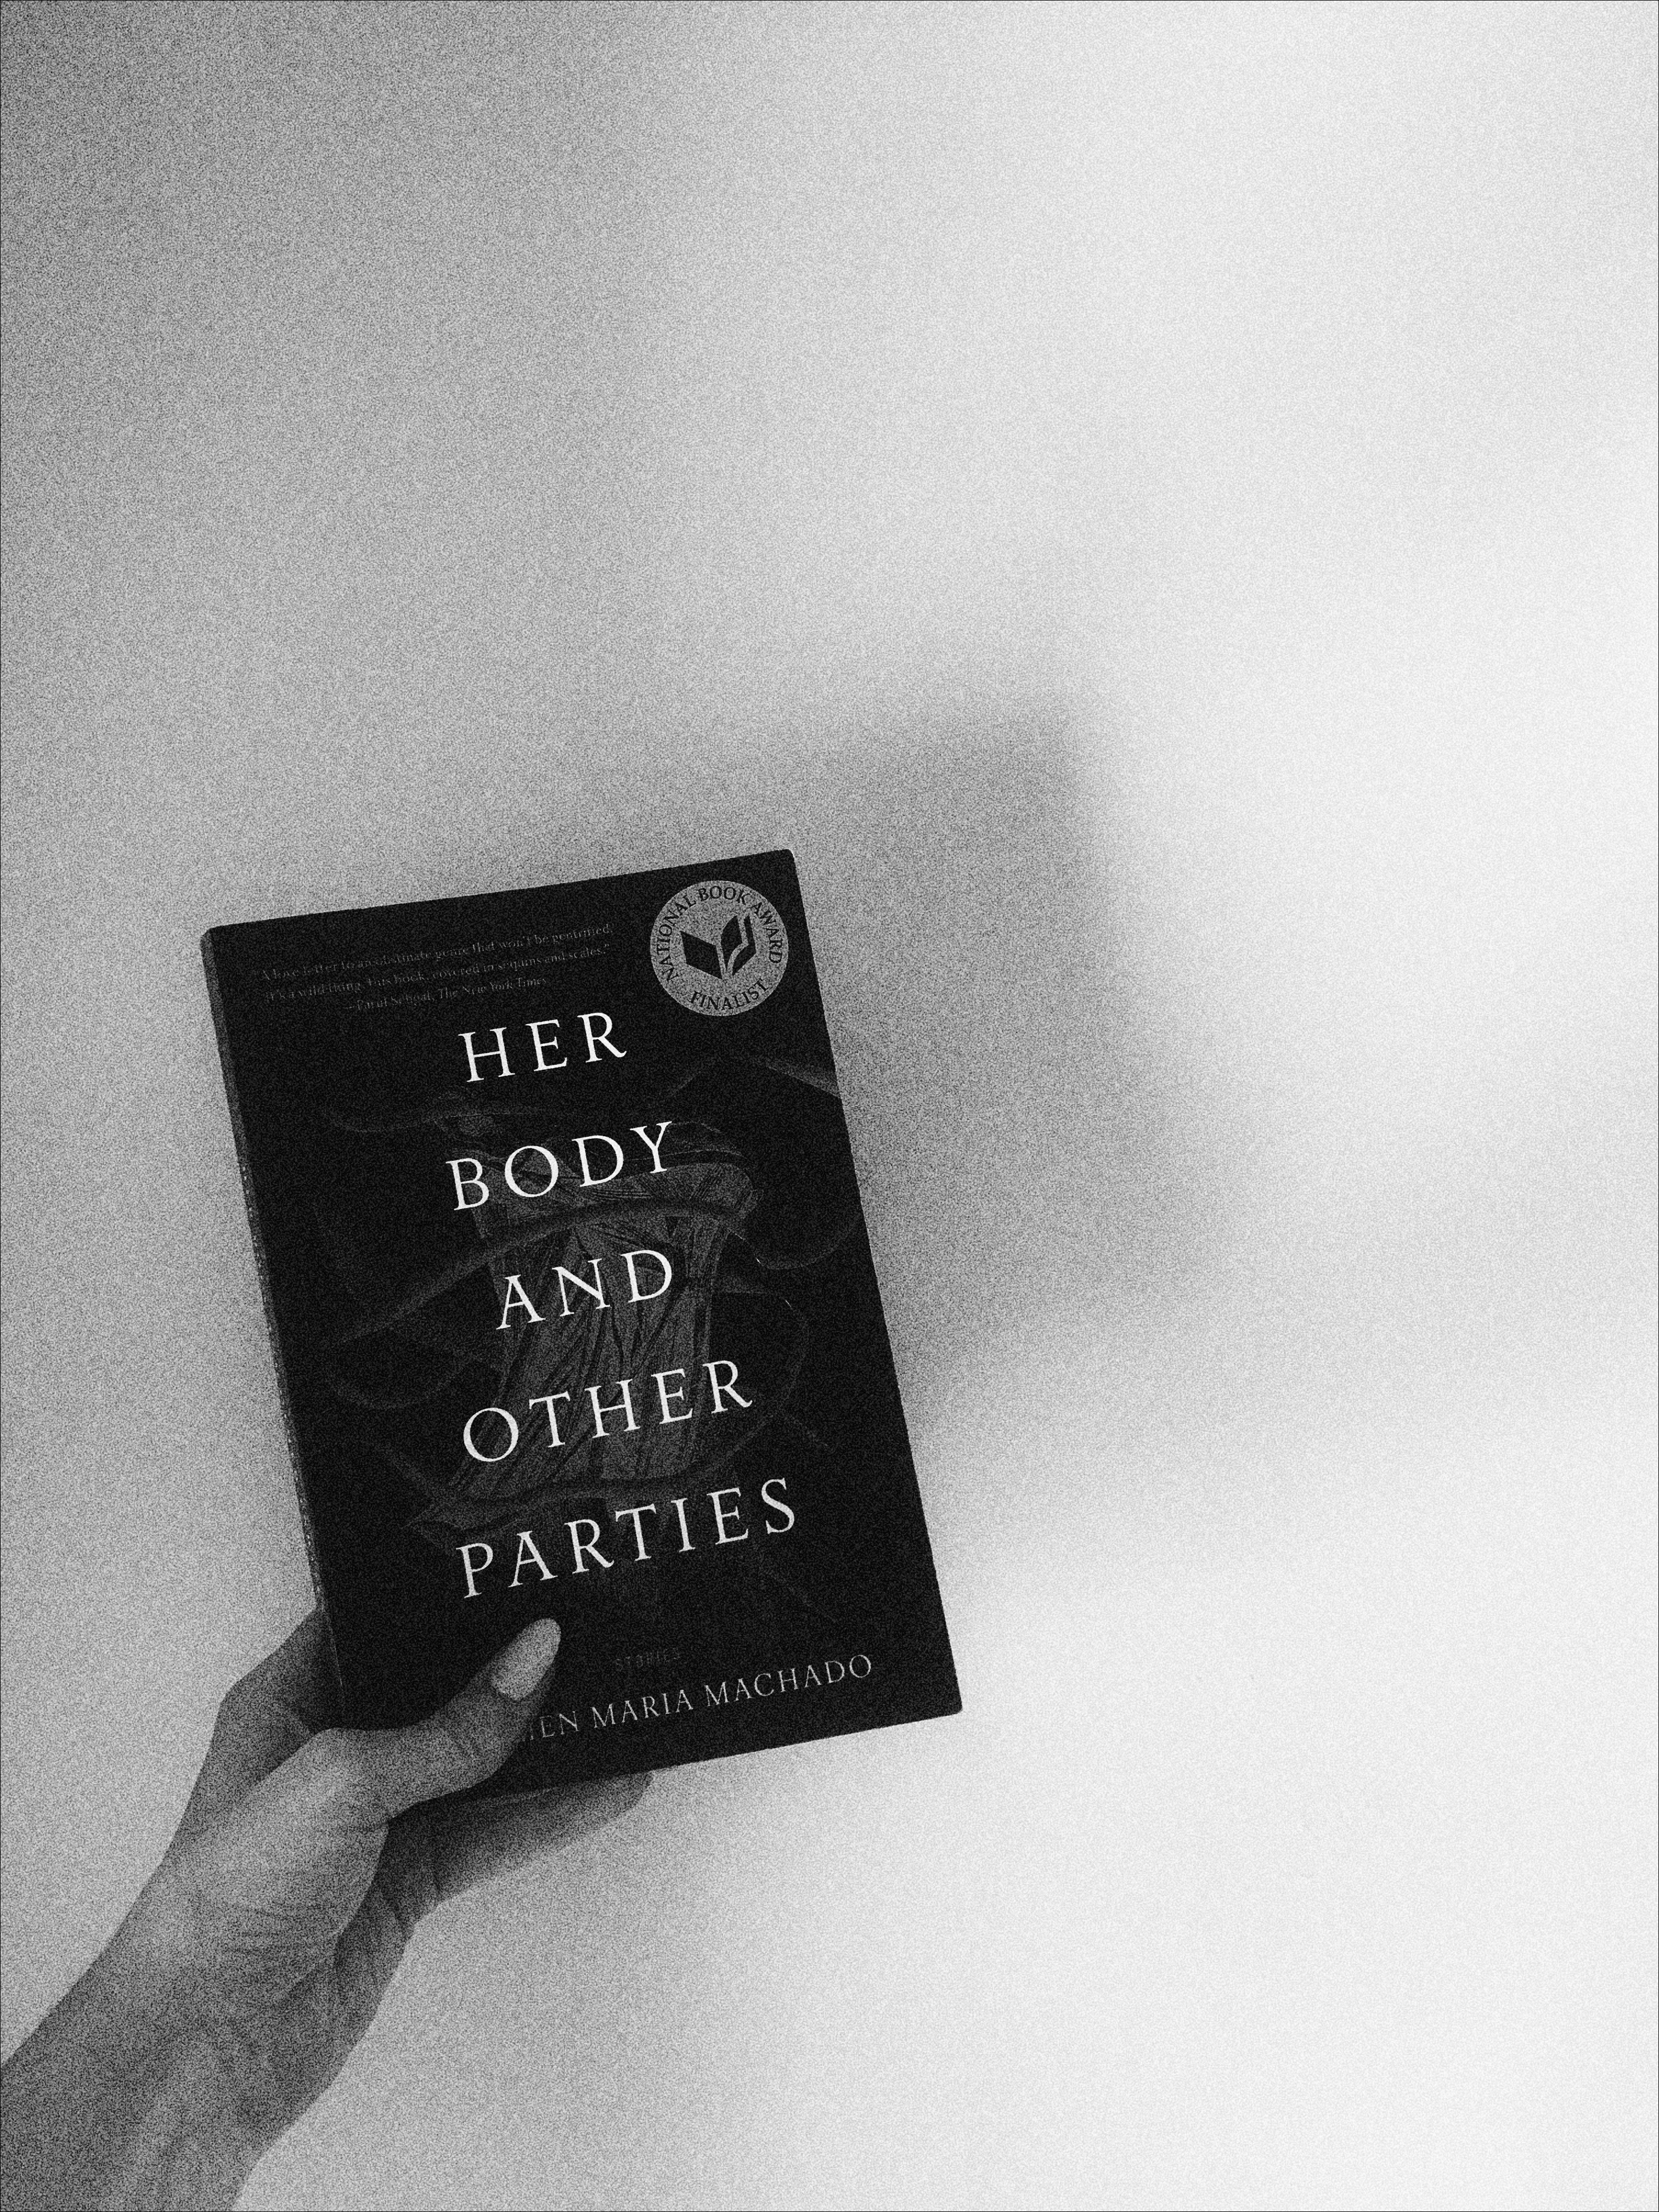 image of Her Body and Other Parties book